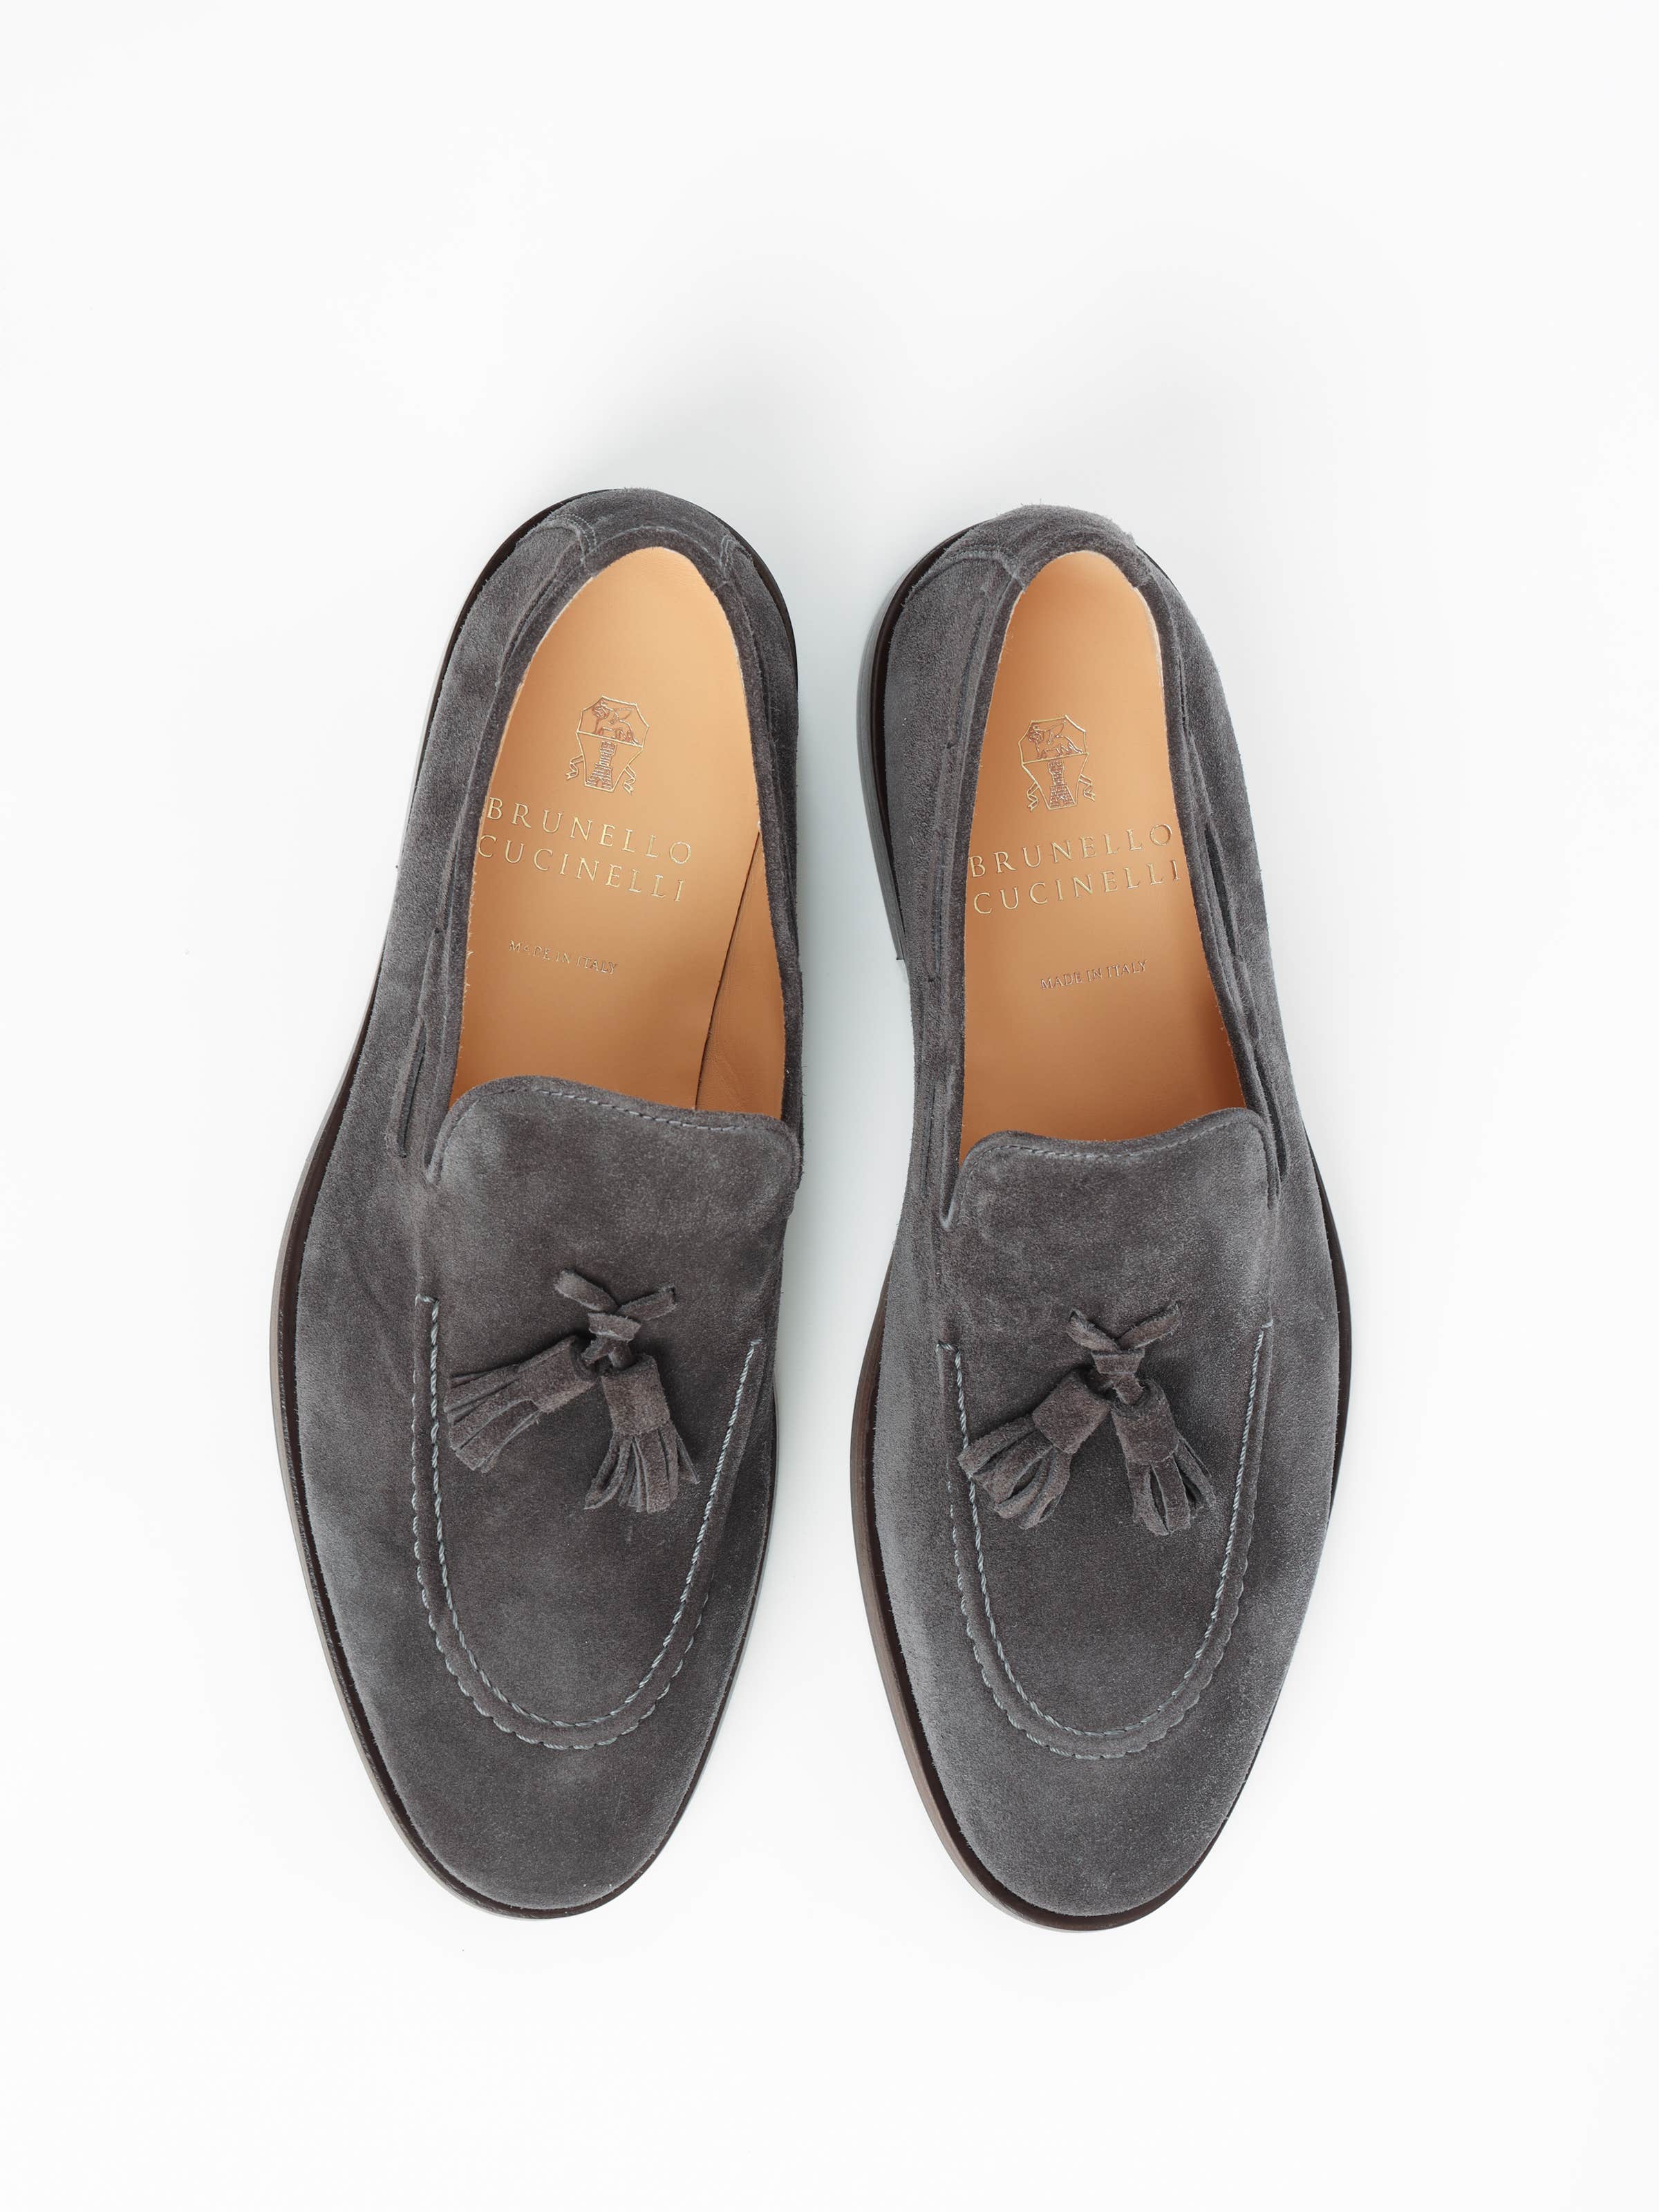 Grey Suede Loafers with Tassels